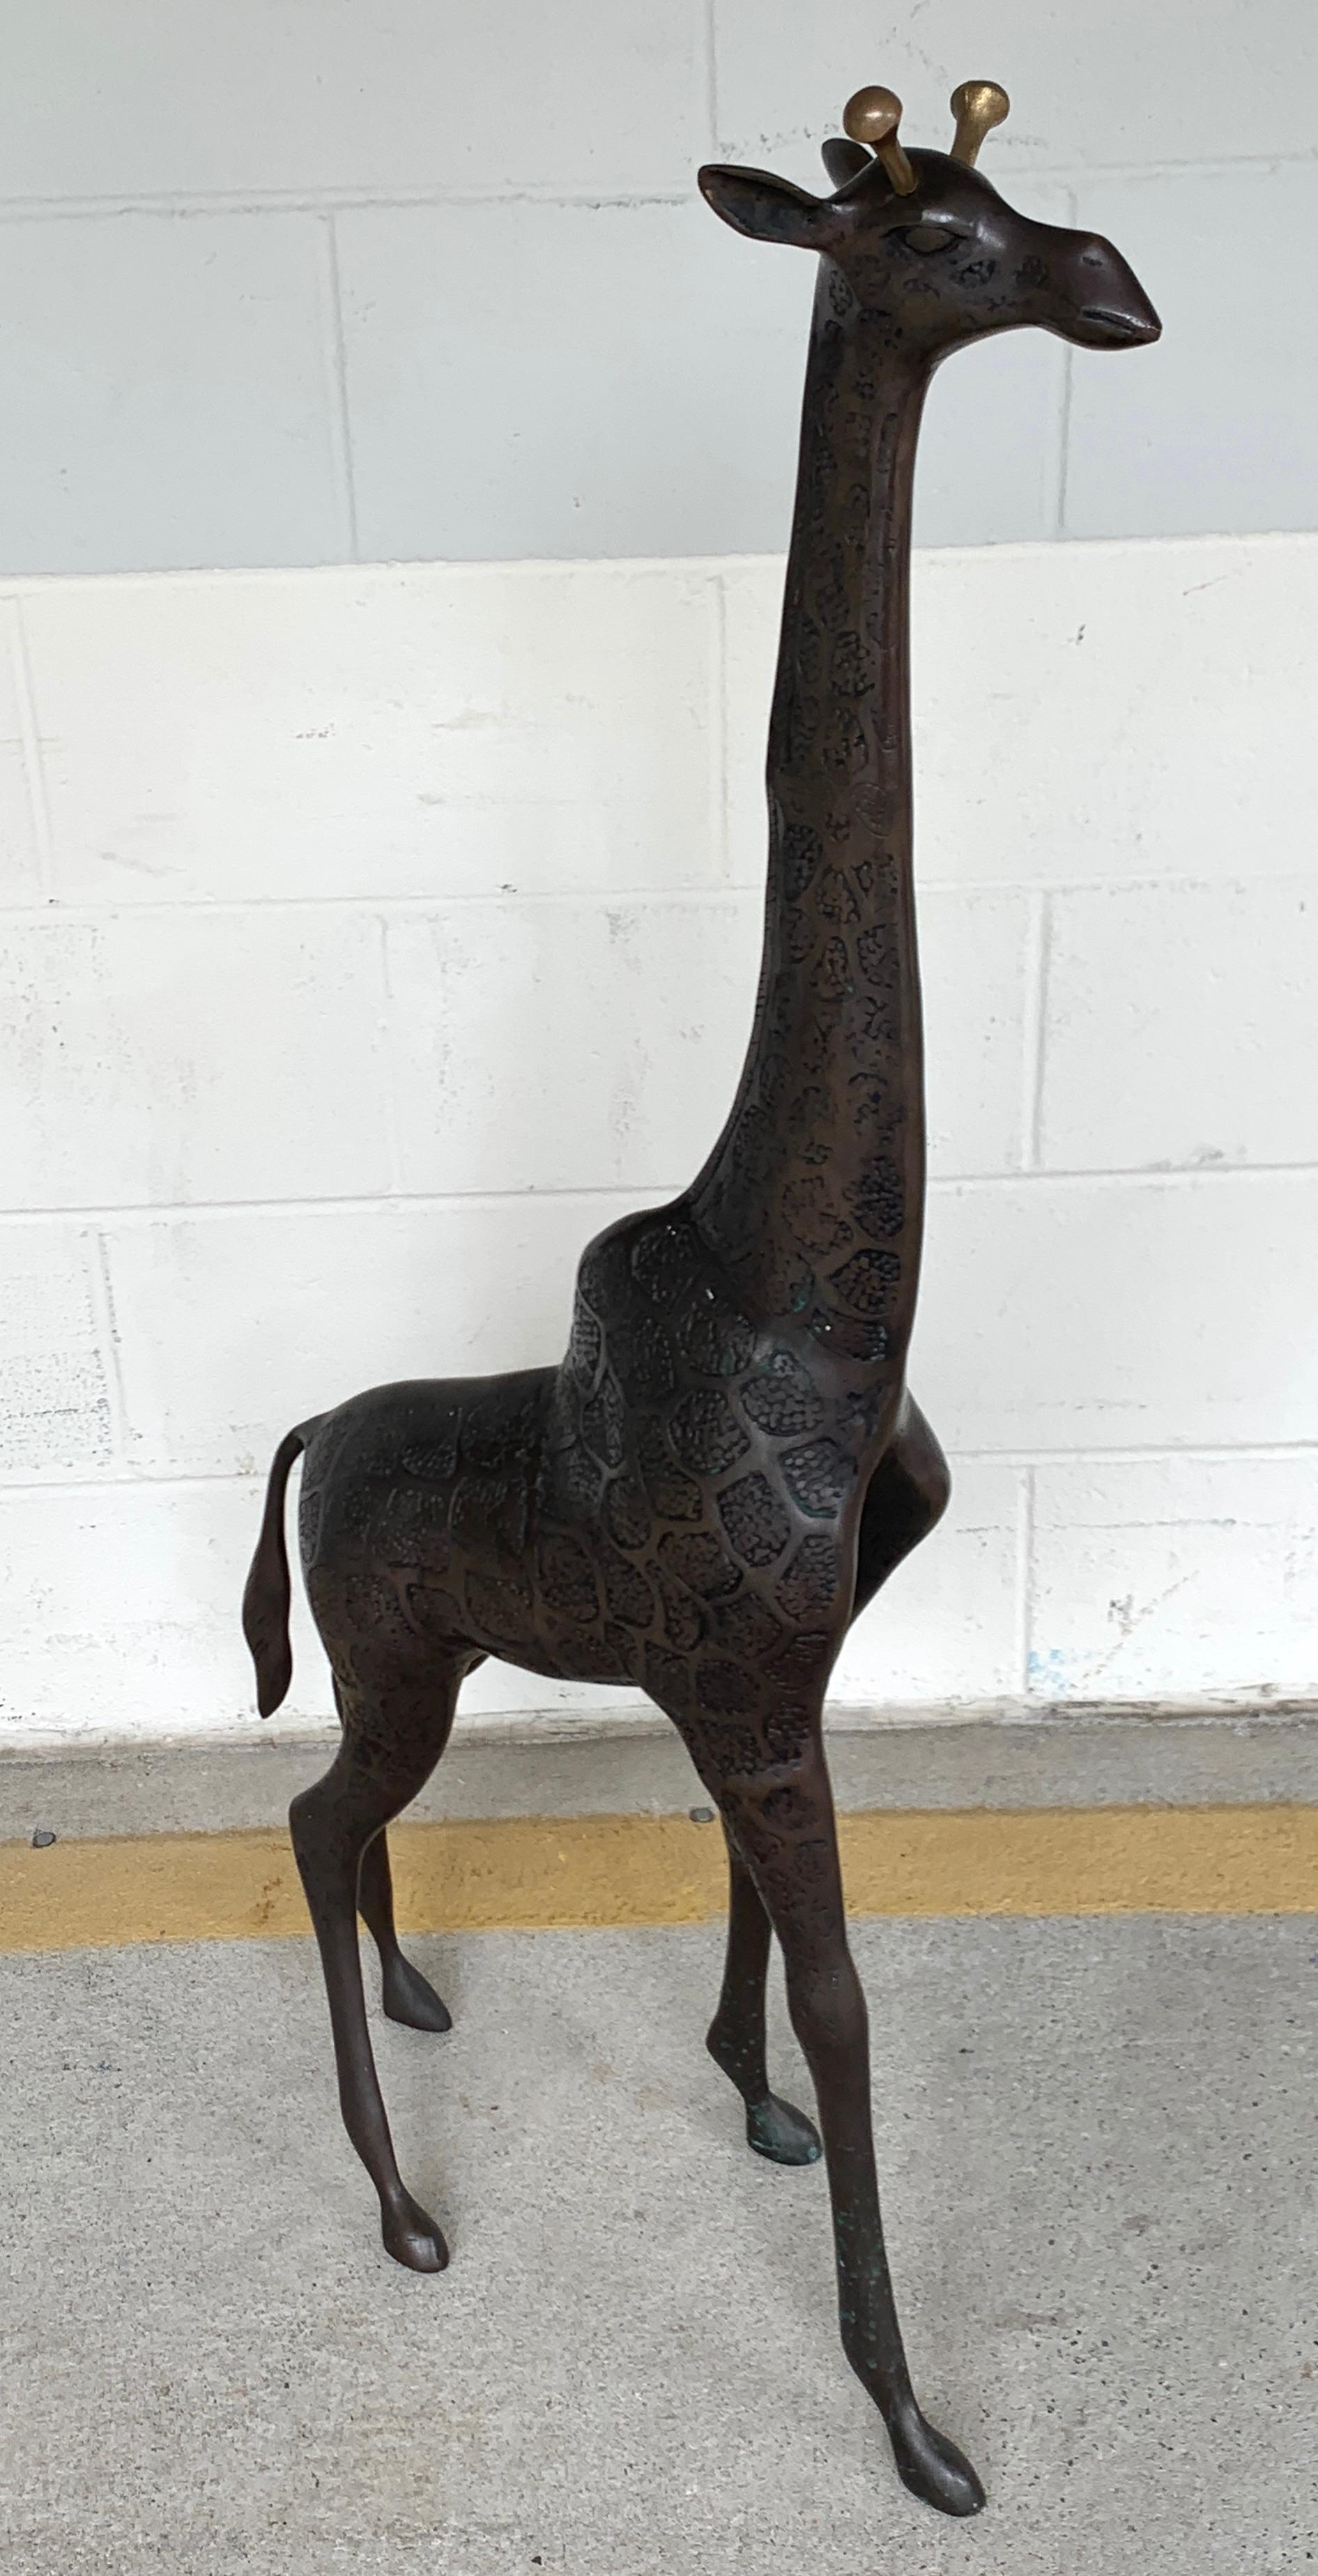 Single midcentury bronze sculpture of a giraffe, realistically cast and modeled. Can be used indoors or outdoors.